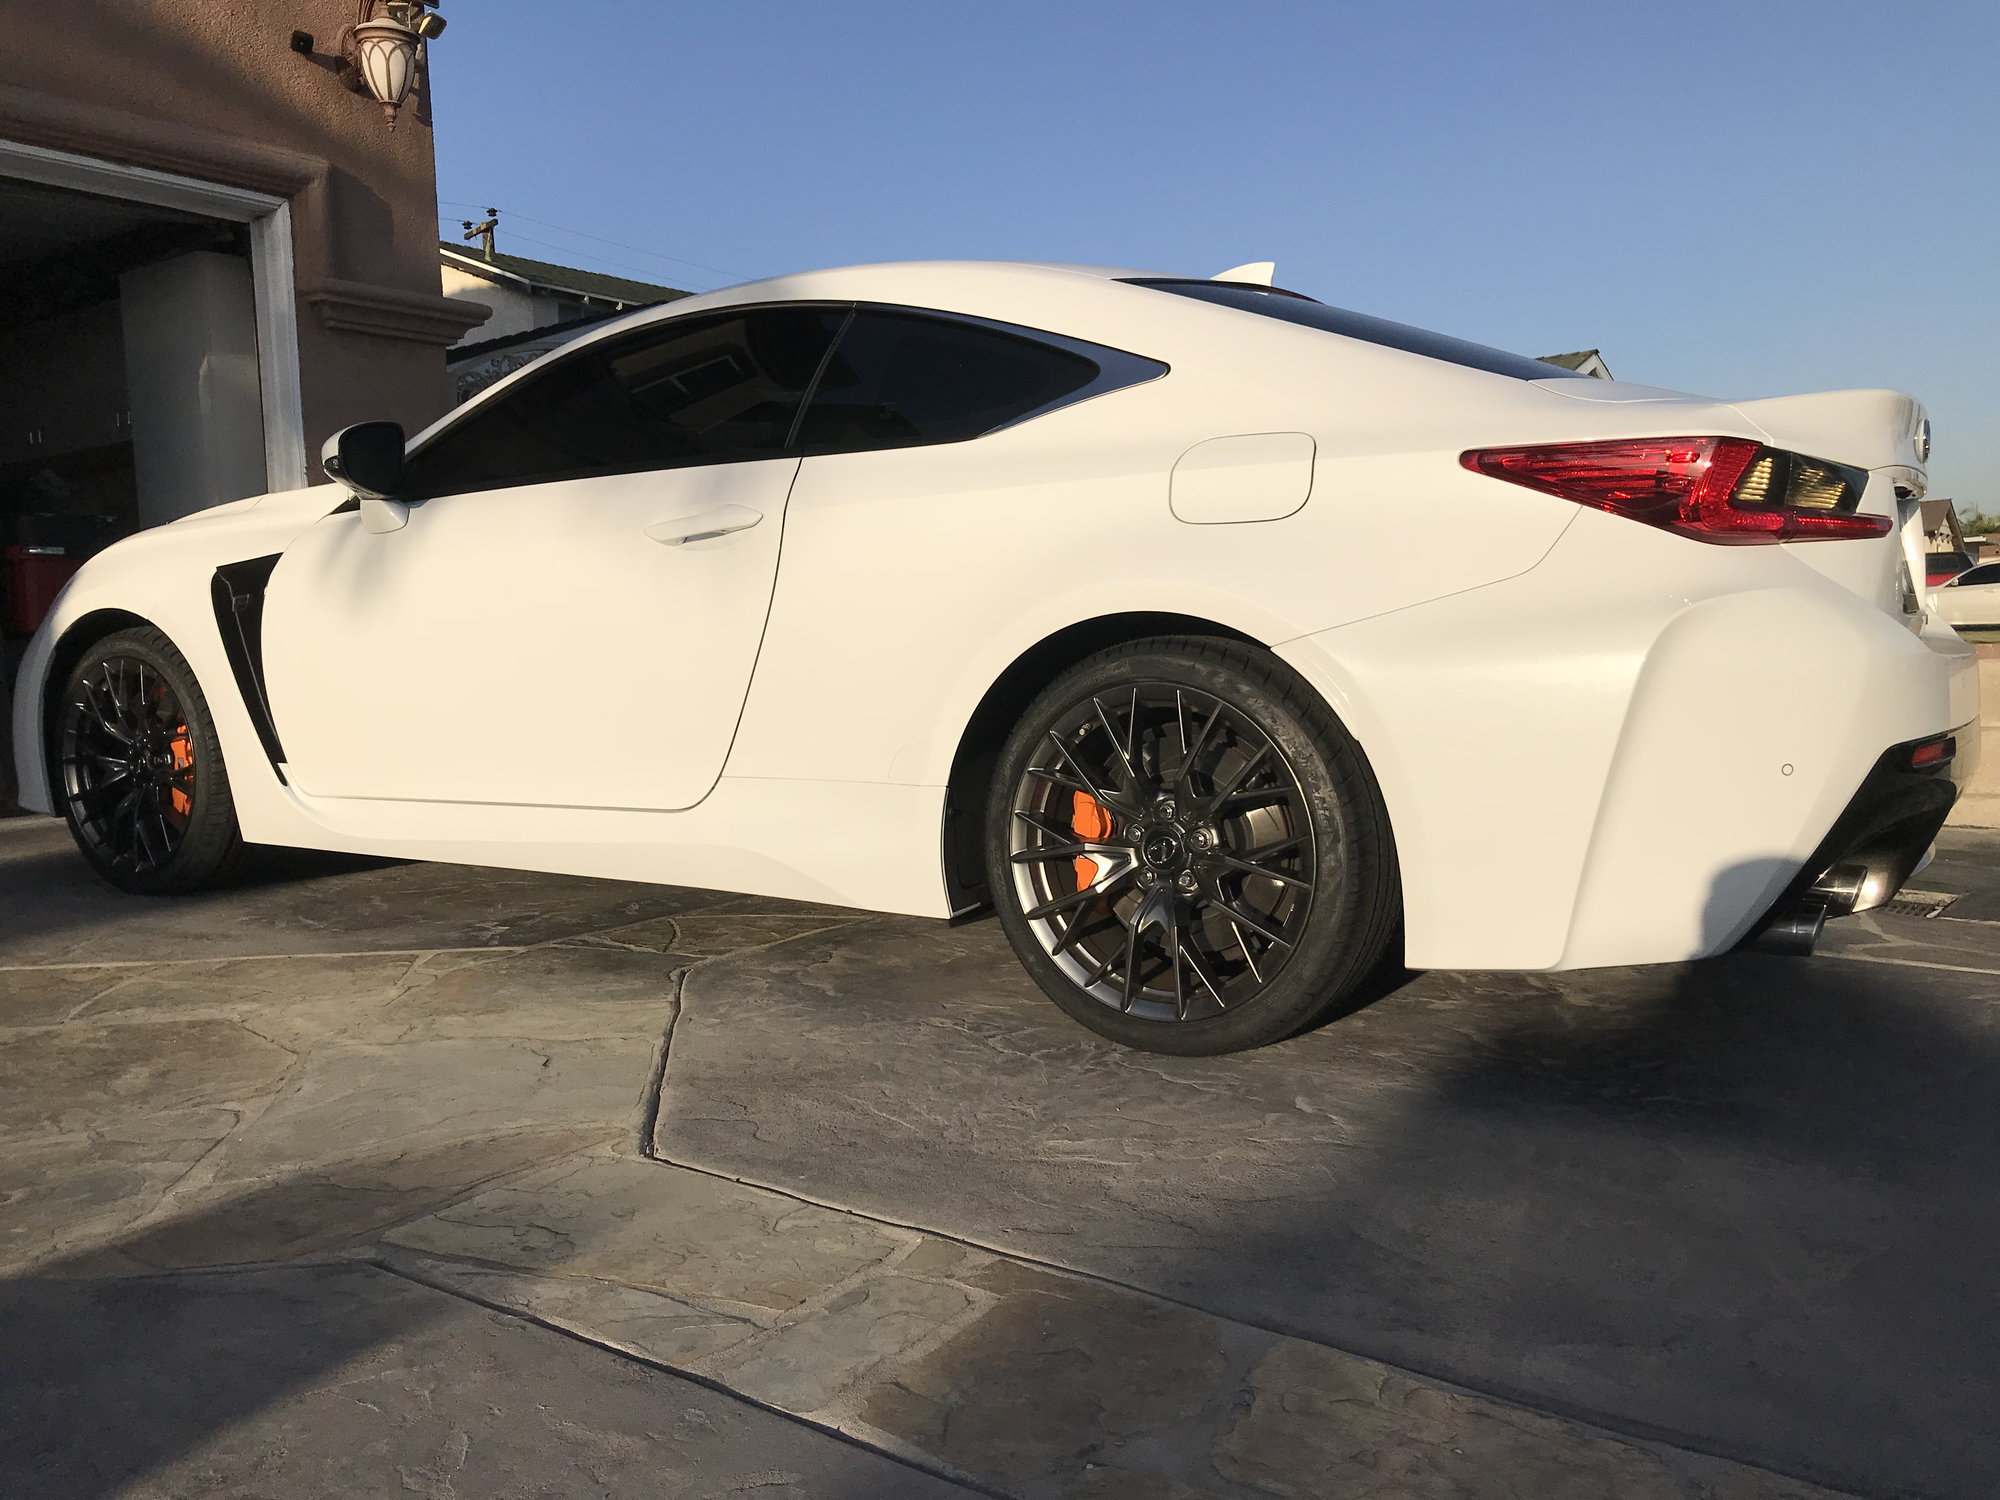 Wheels and Tires/Axles - Fs oem factory gsf wheels all fronts 4(19x9) wheels!!! - Used - 2016 to 2018 Lexus GS F - Huntington Beach, CA 92649, United States